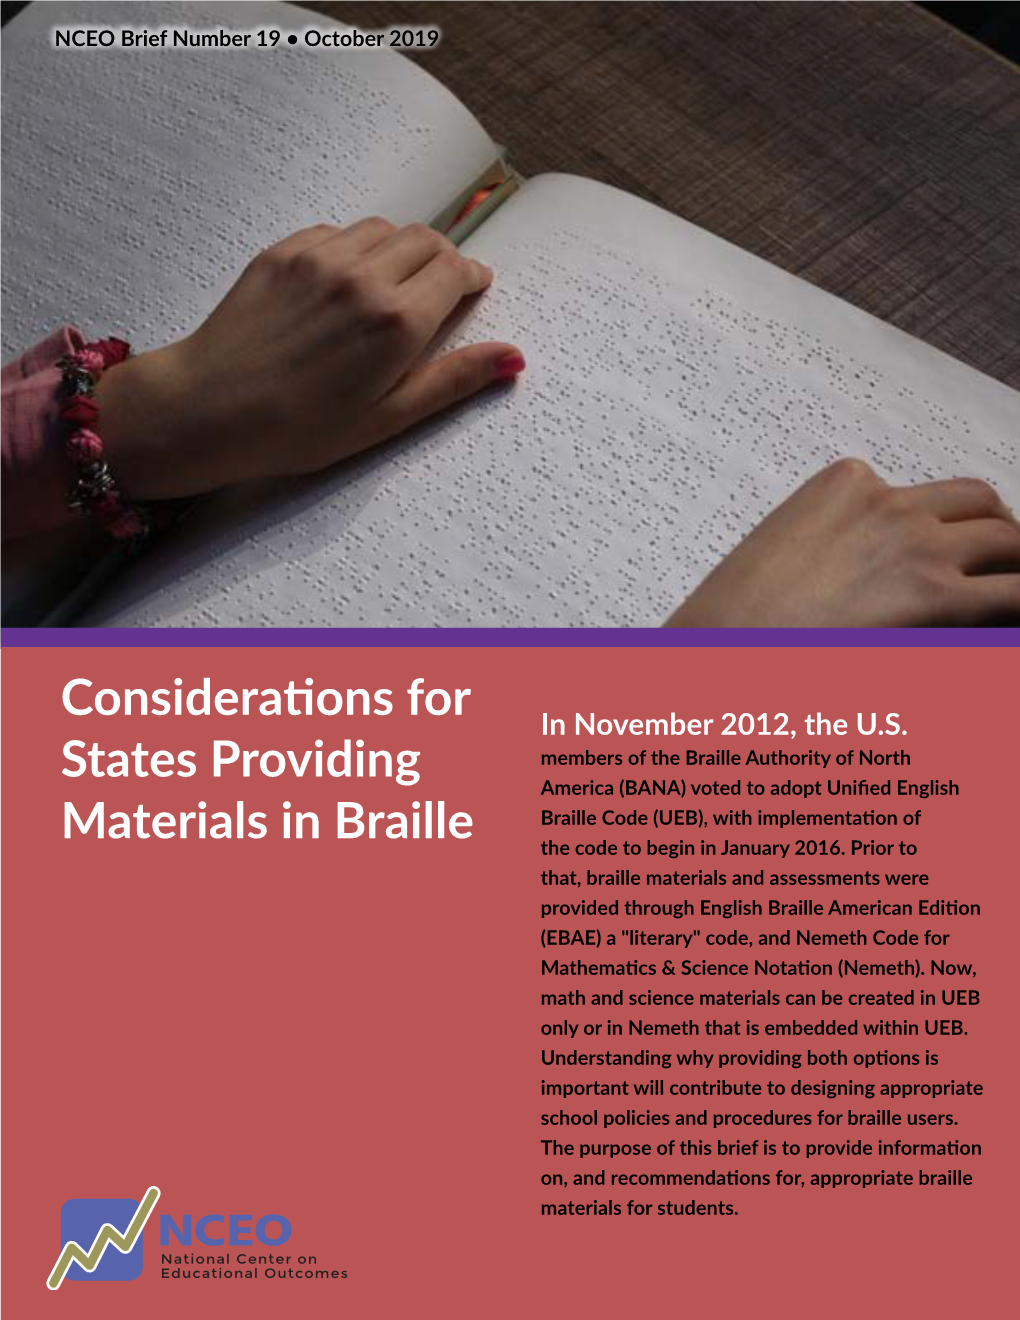 Considerations for States Providing Materials in Braille (NCEO Brief #19)